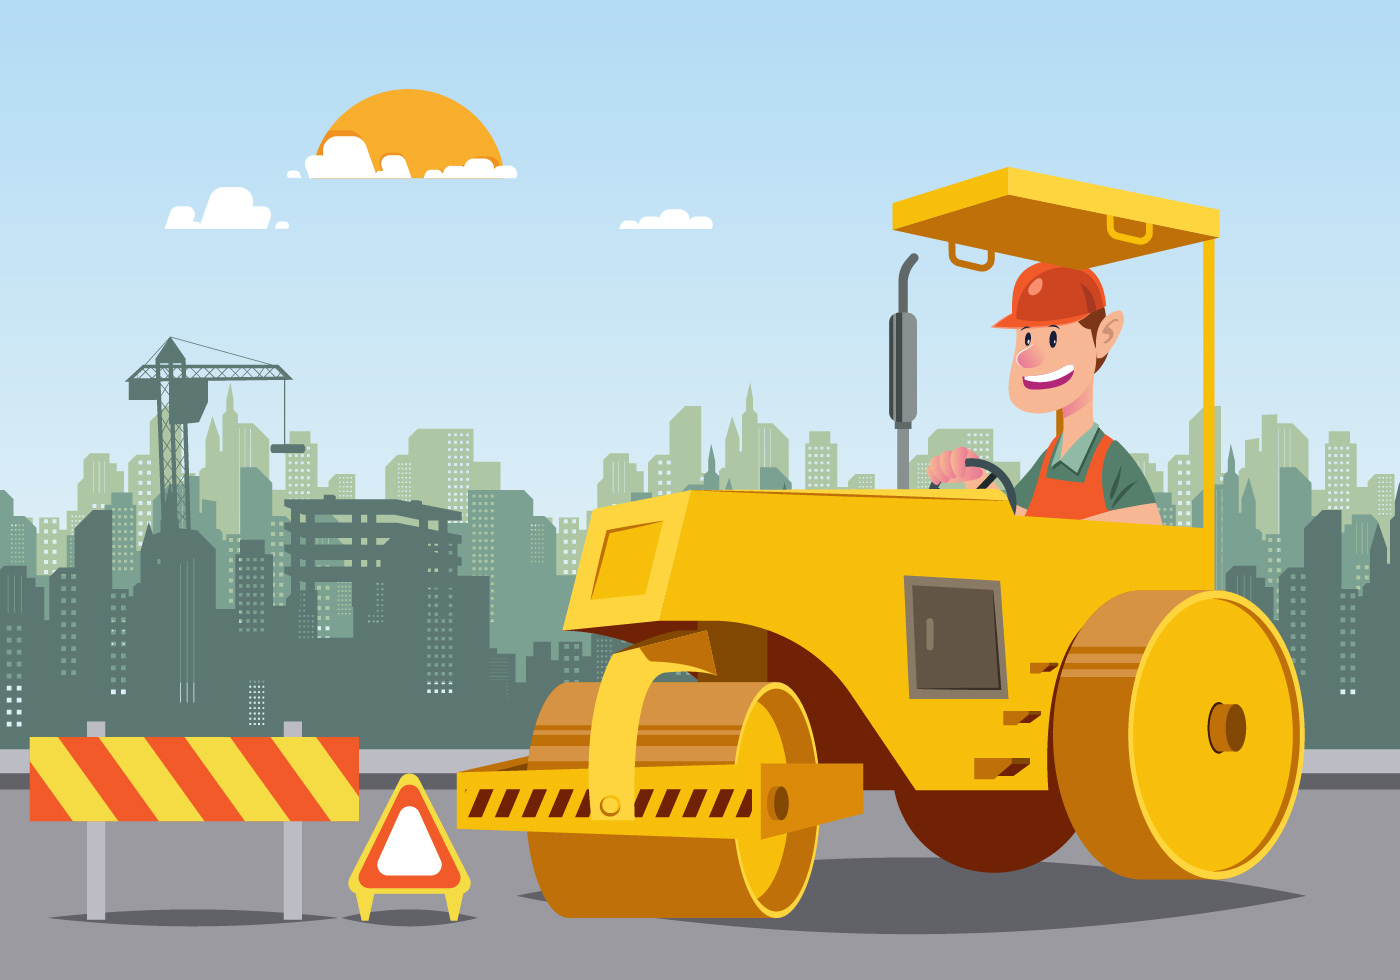 Road Roller With Building In The Background - Download Free Vectors,  Clipart Graphics & Vector Art